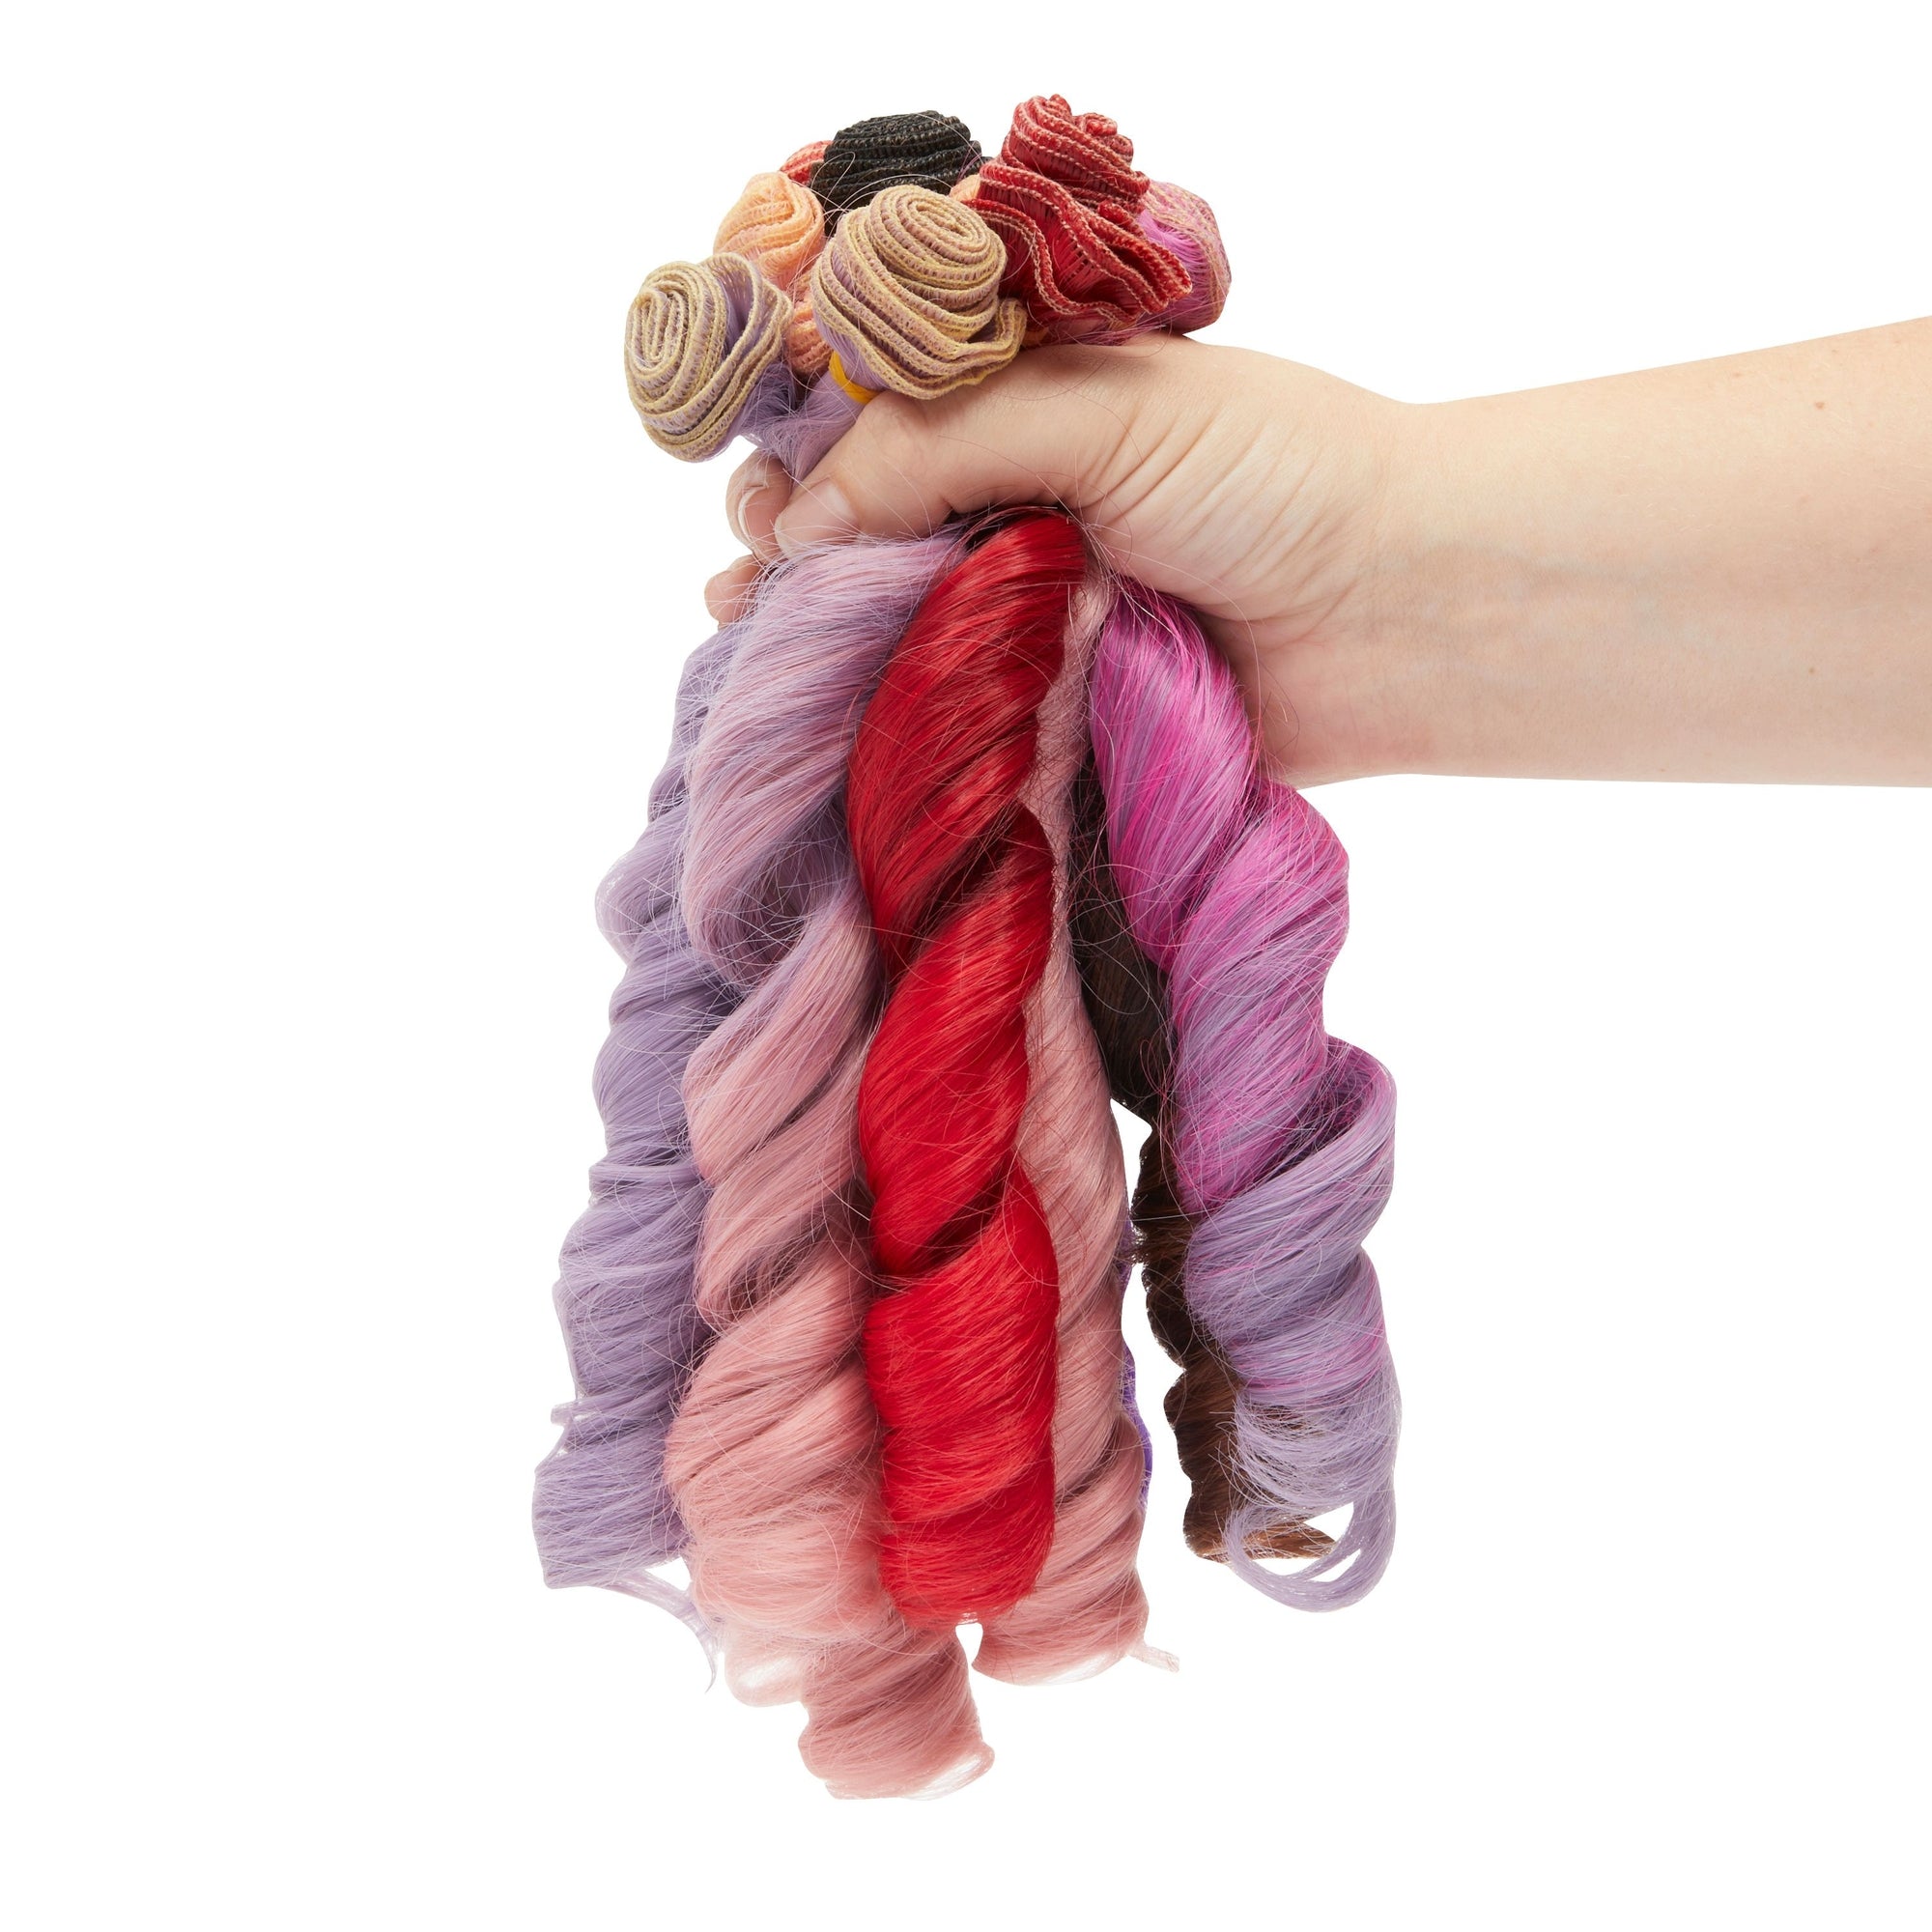 How to Curl Yarn wefts + How to Make a Doll Wig, Curls